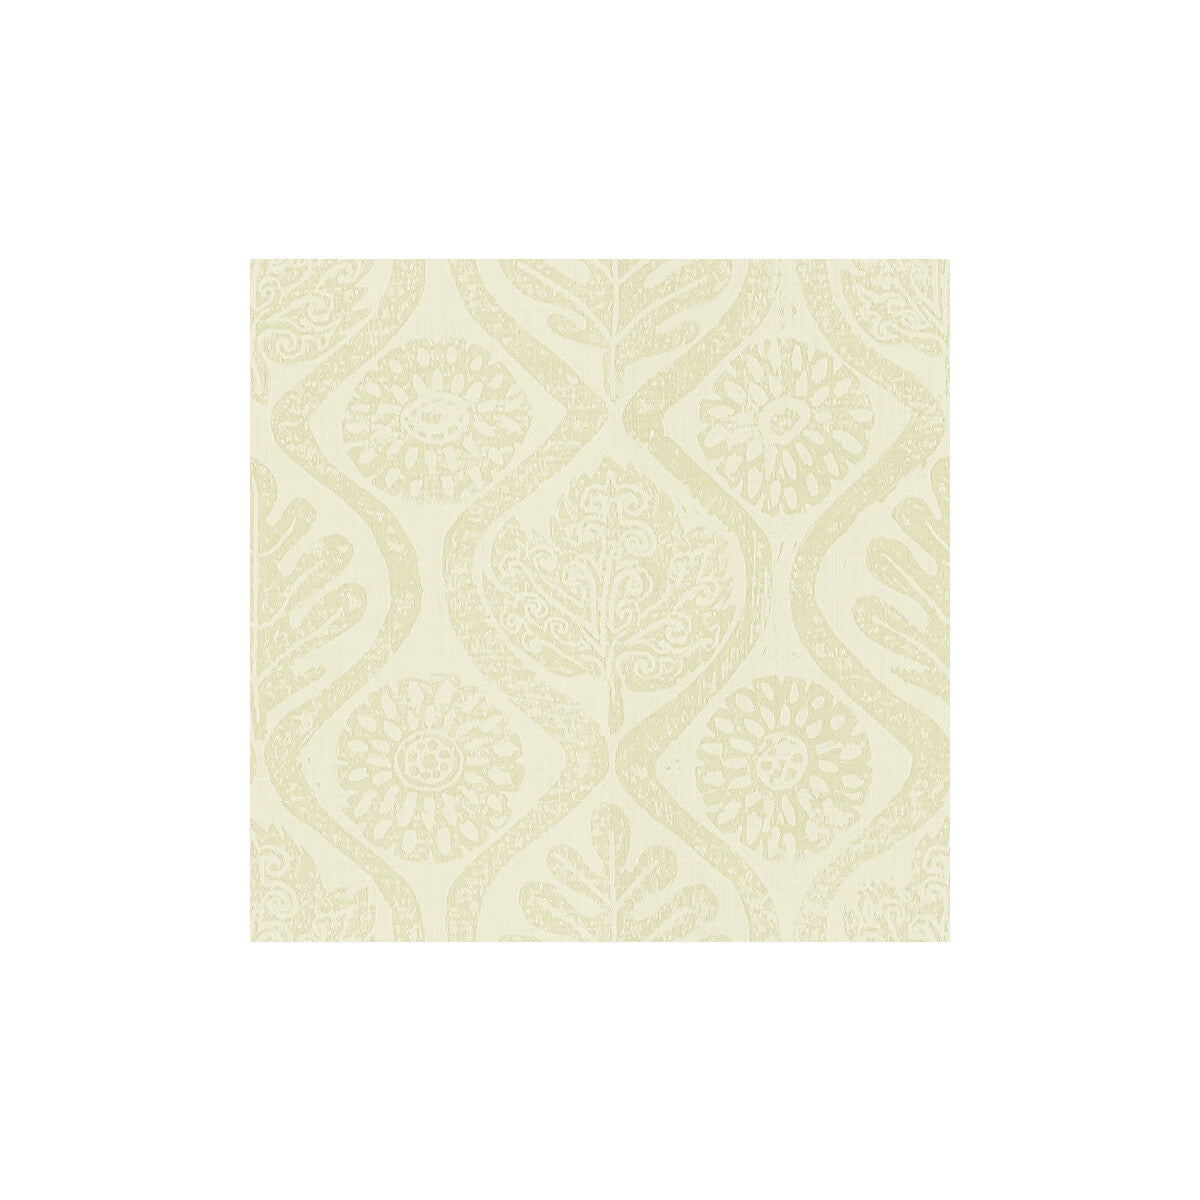 Oakleaves fabric in beige color - pattern BFC-3514.16.0 - by Lee Jofa in the Blithfield collection